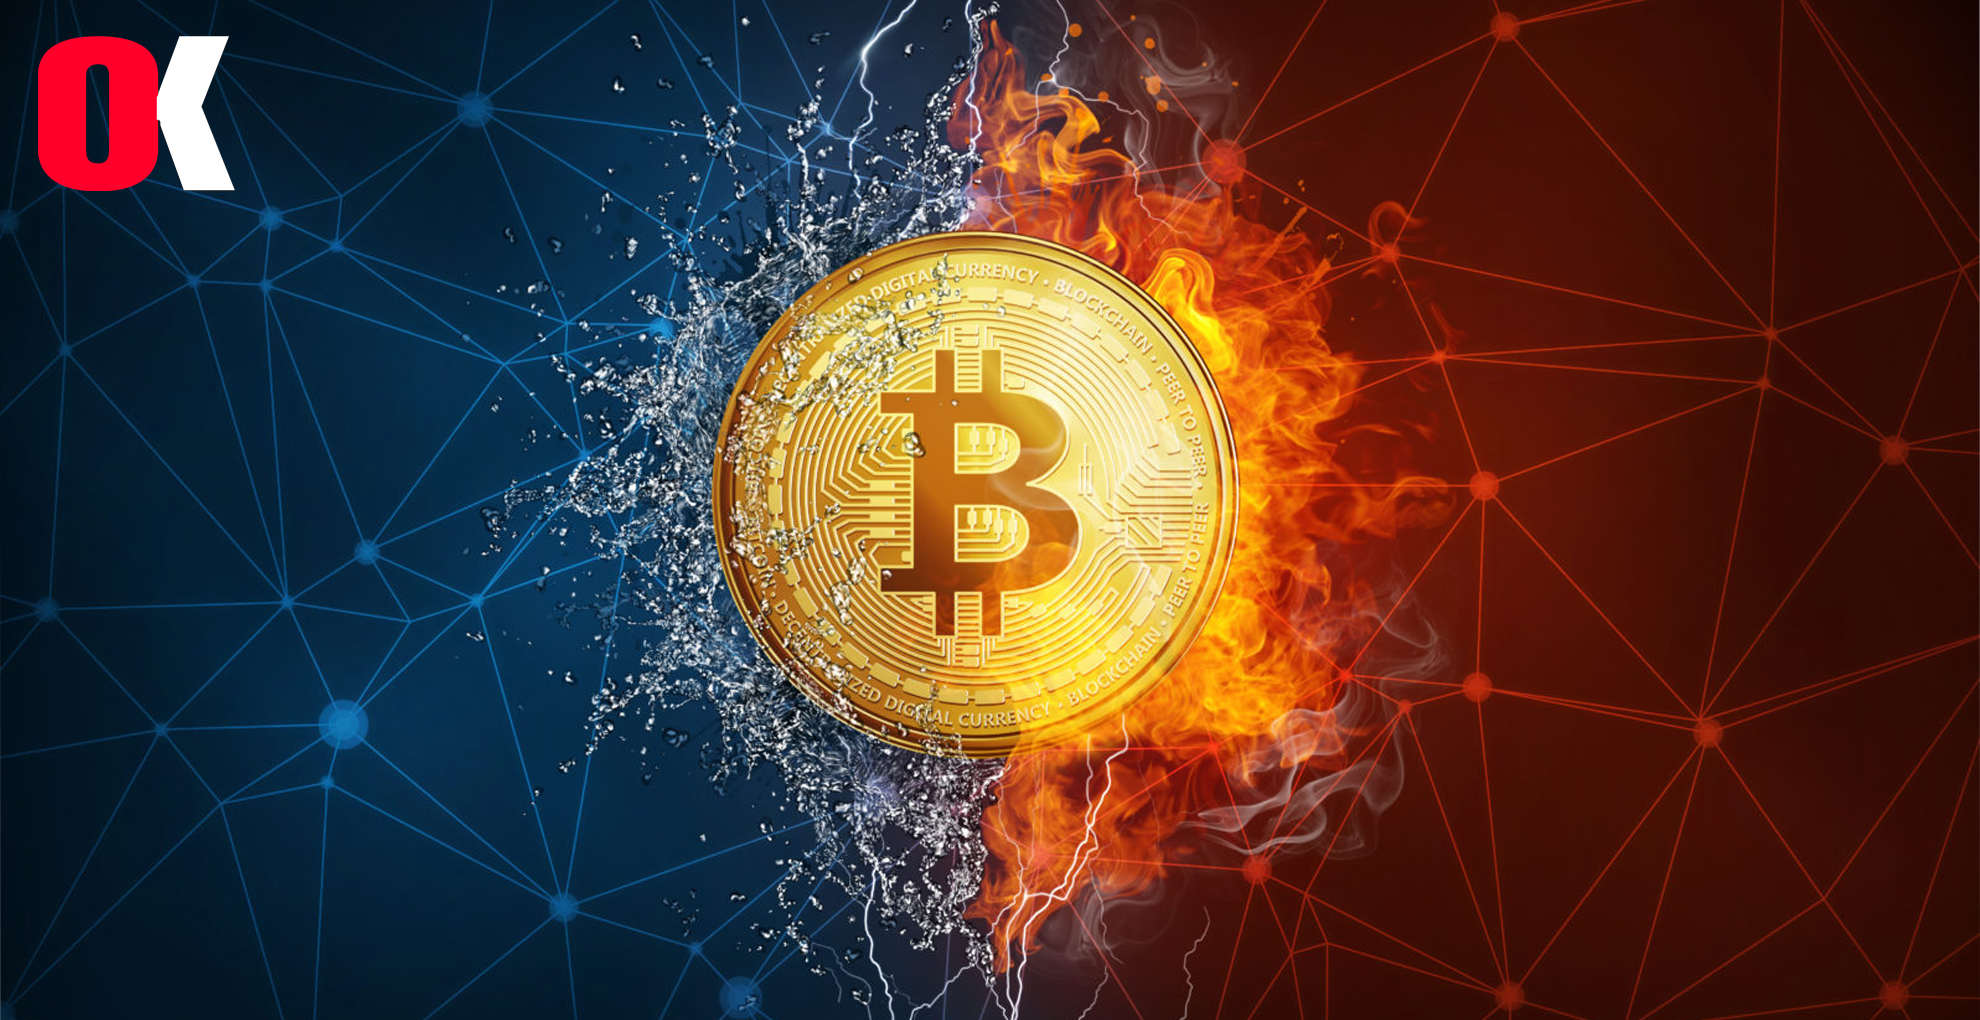 Bitcoin and Other Cryptocurrencies Future Forecast